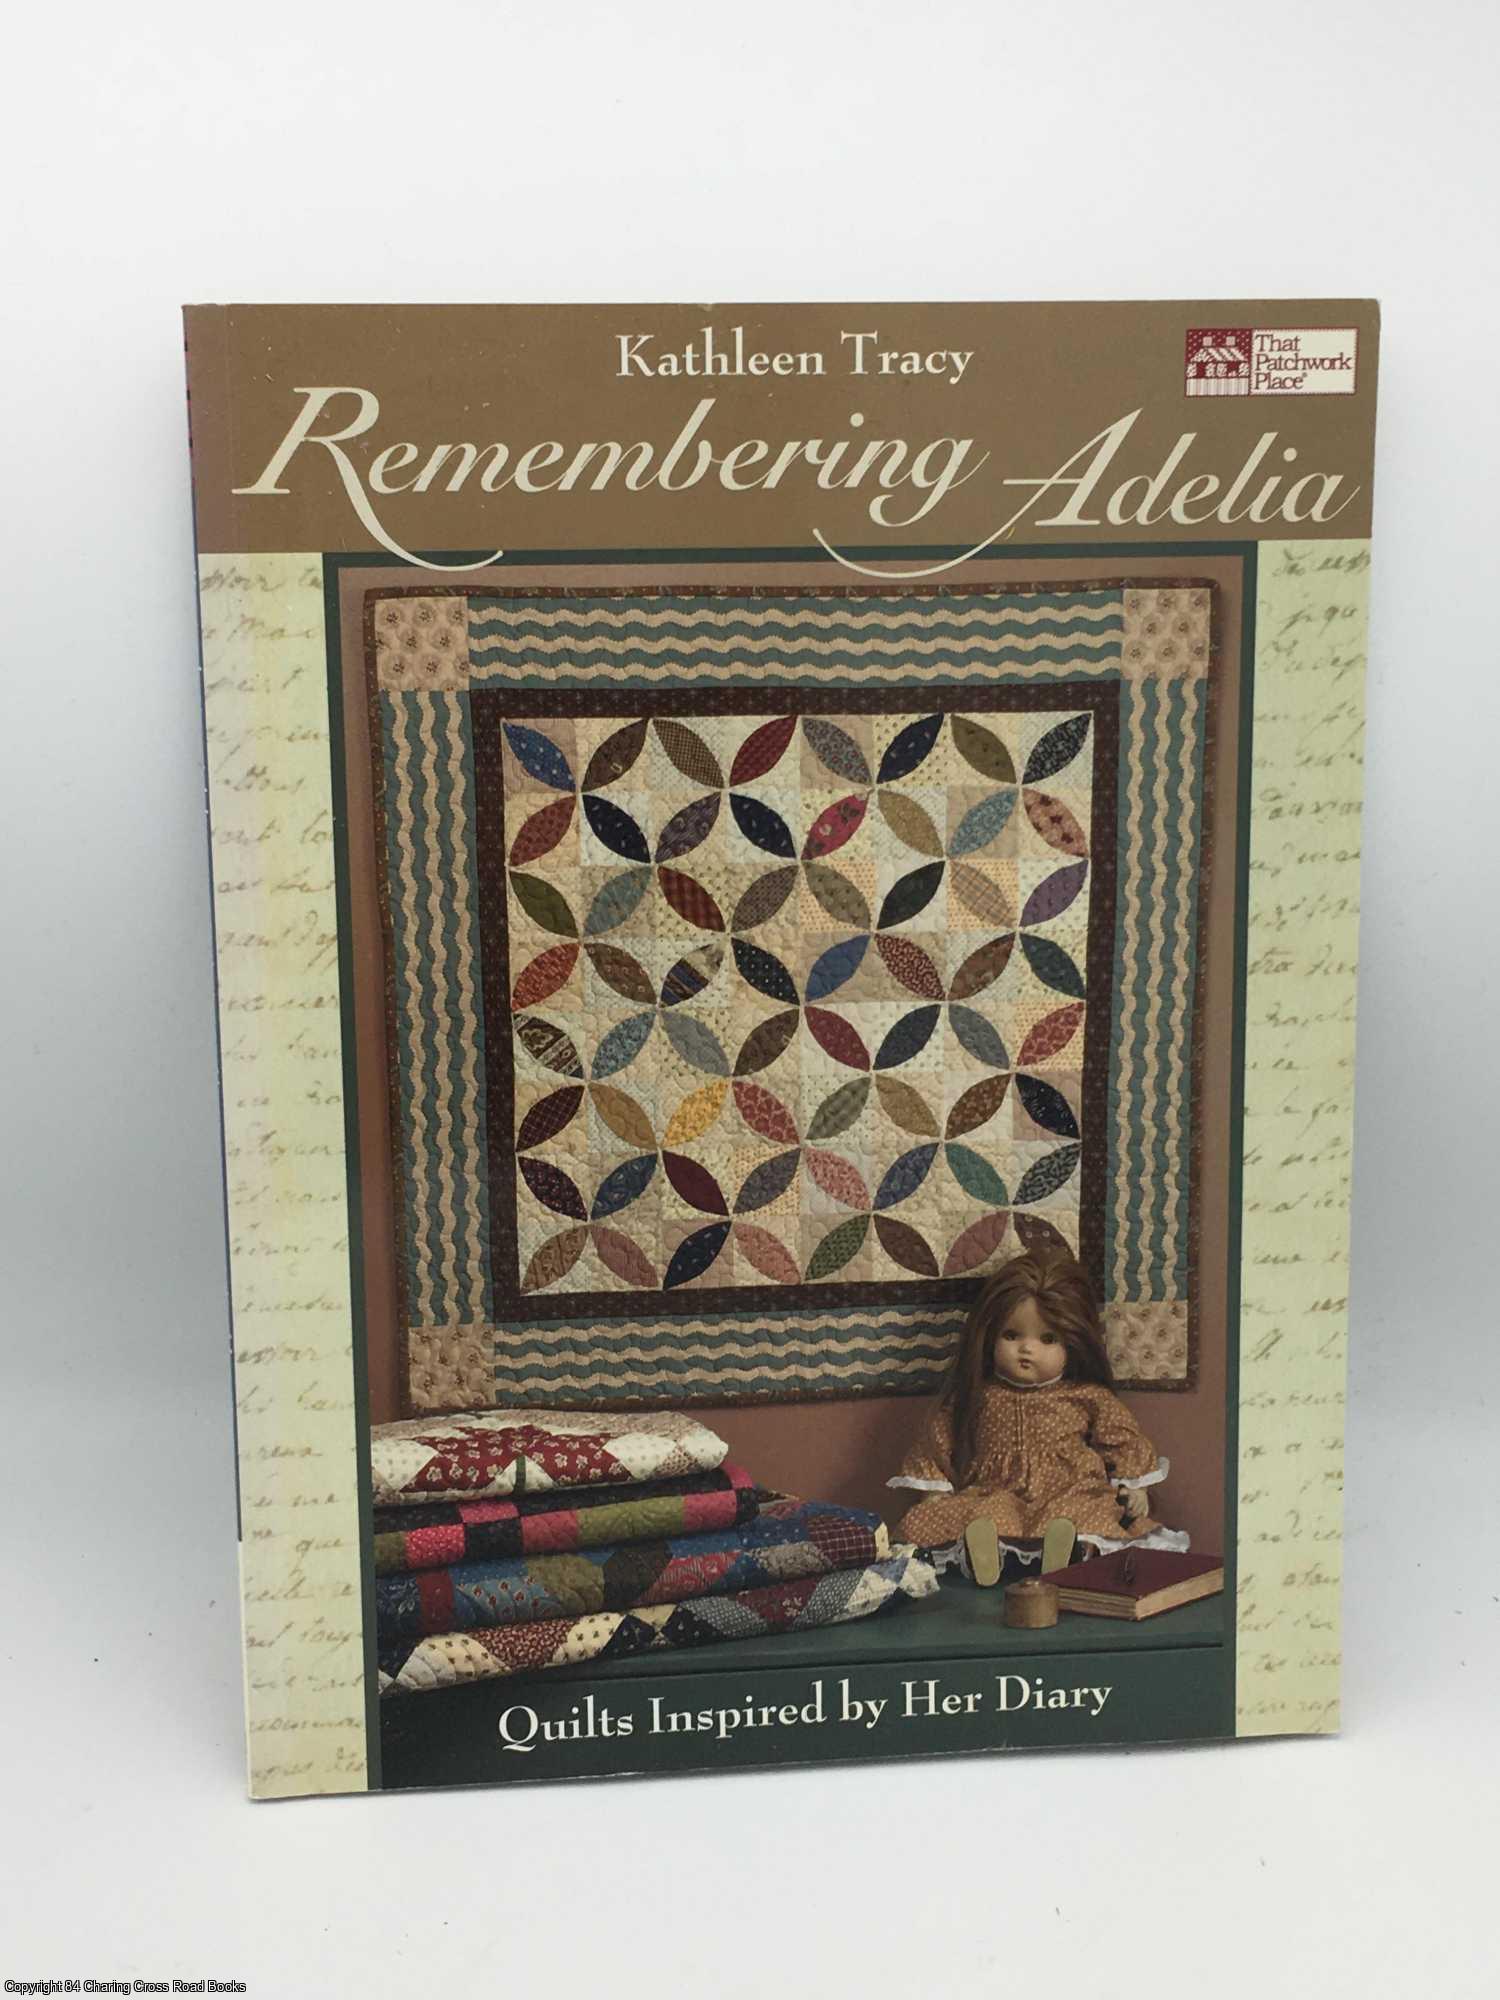 Tracy, Kathleen - Remembering Adelia: Quilts Inspired by Her Diary